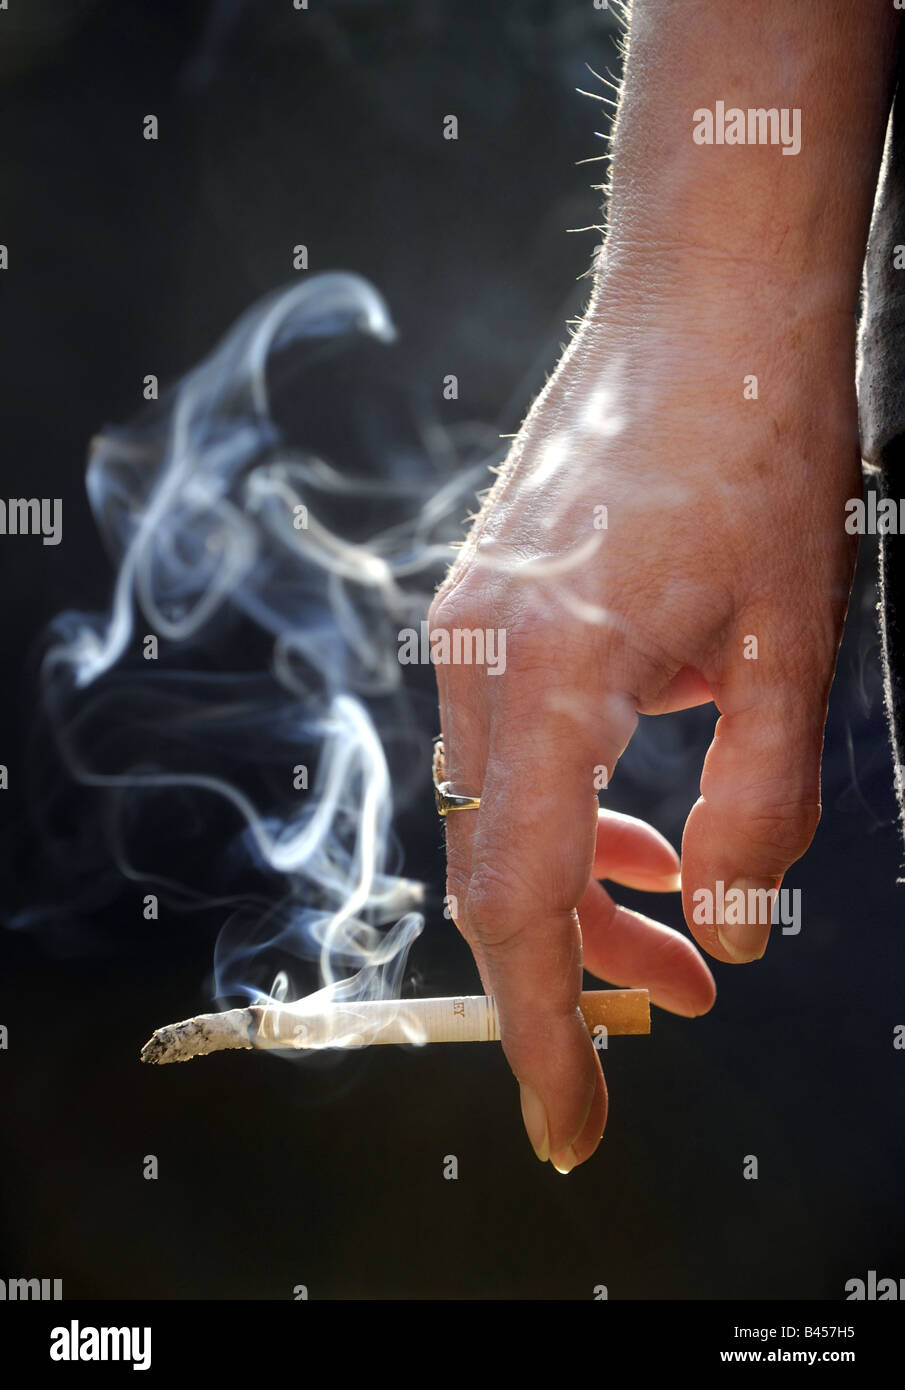 A  LIT CIGARETTE SMOKING IN A WOMANS HAND. RE HEALTH CANCER SMOKERS DISEASE LUNG LUNGS HOSPITALS LIFESTYLE HEALTHY UK Stock Photo